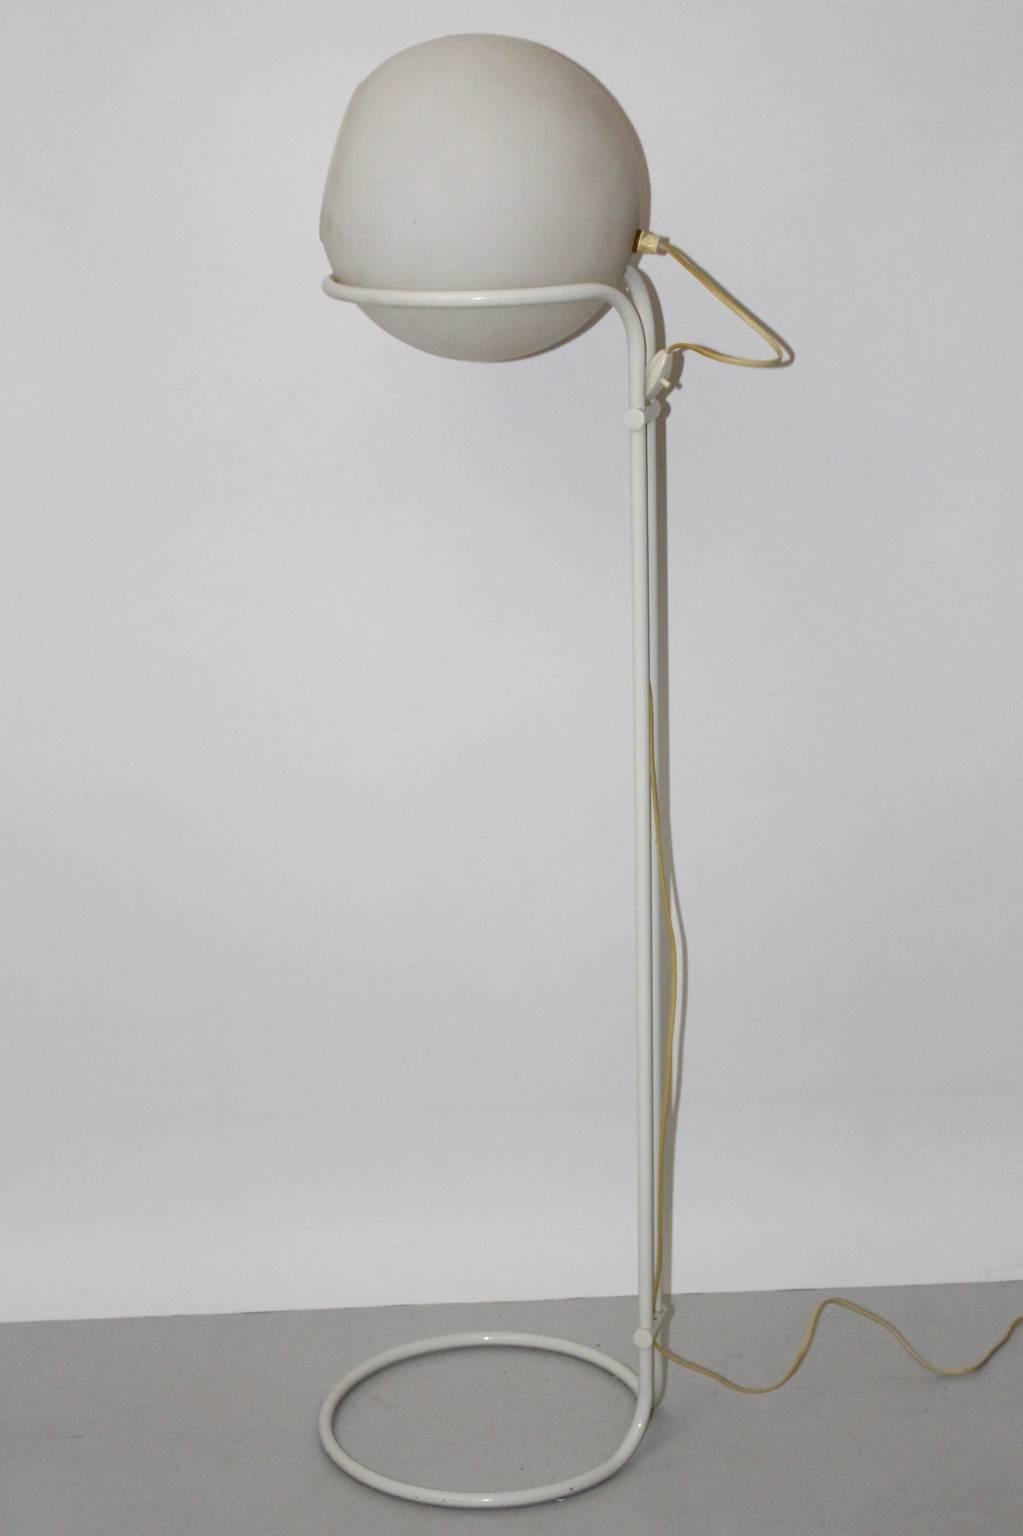 The floor lamp features a frame made of tube steel and white lacquered and shows an adjustable milk glass ball shade.

The milk-glass shade is removable and so you are able to lead the shine in the requested direction.
There is one socket Edison